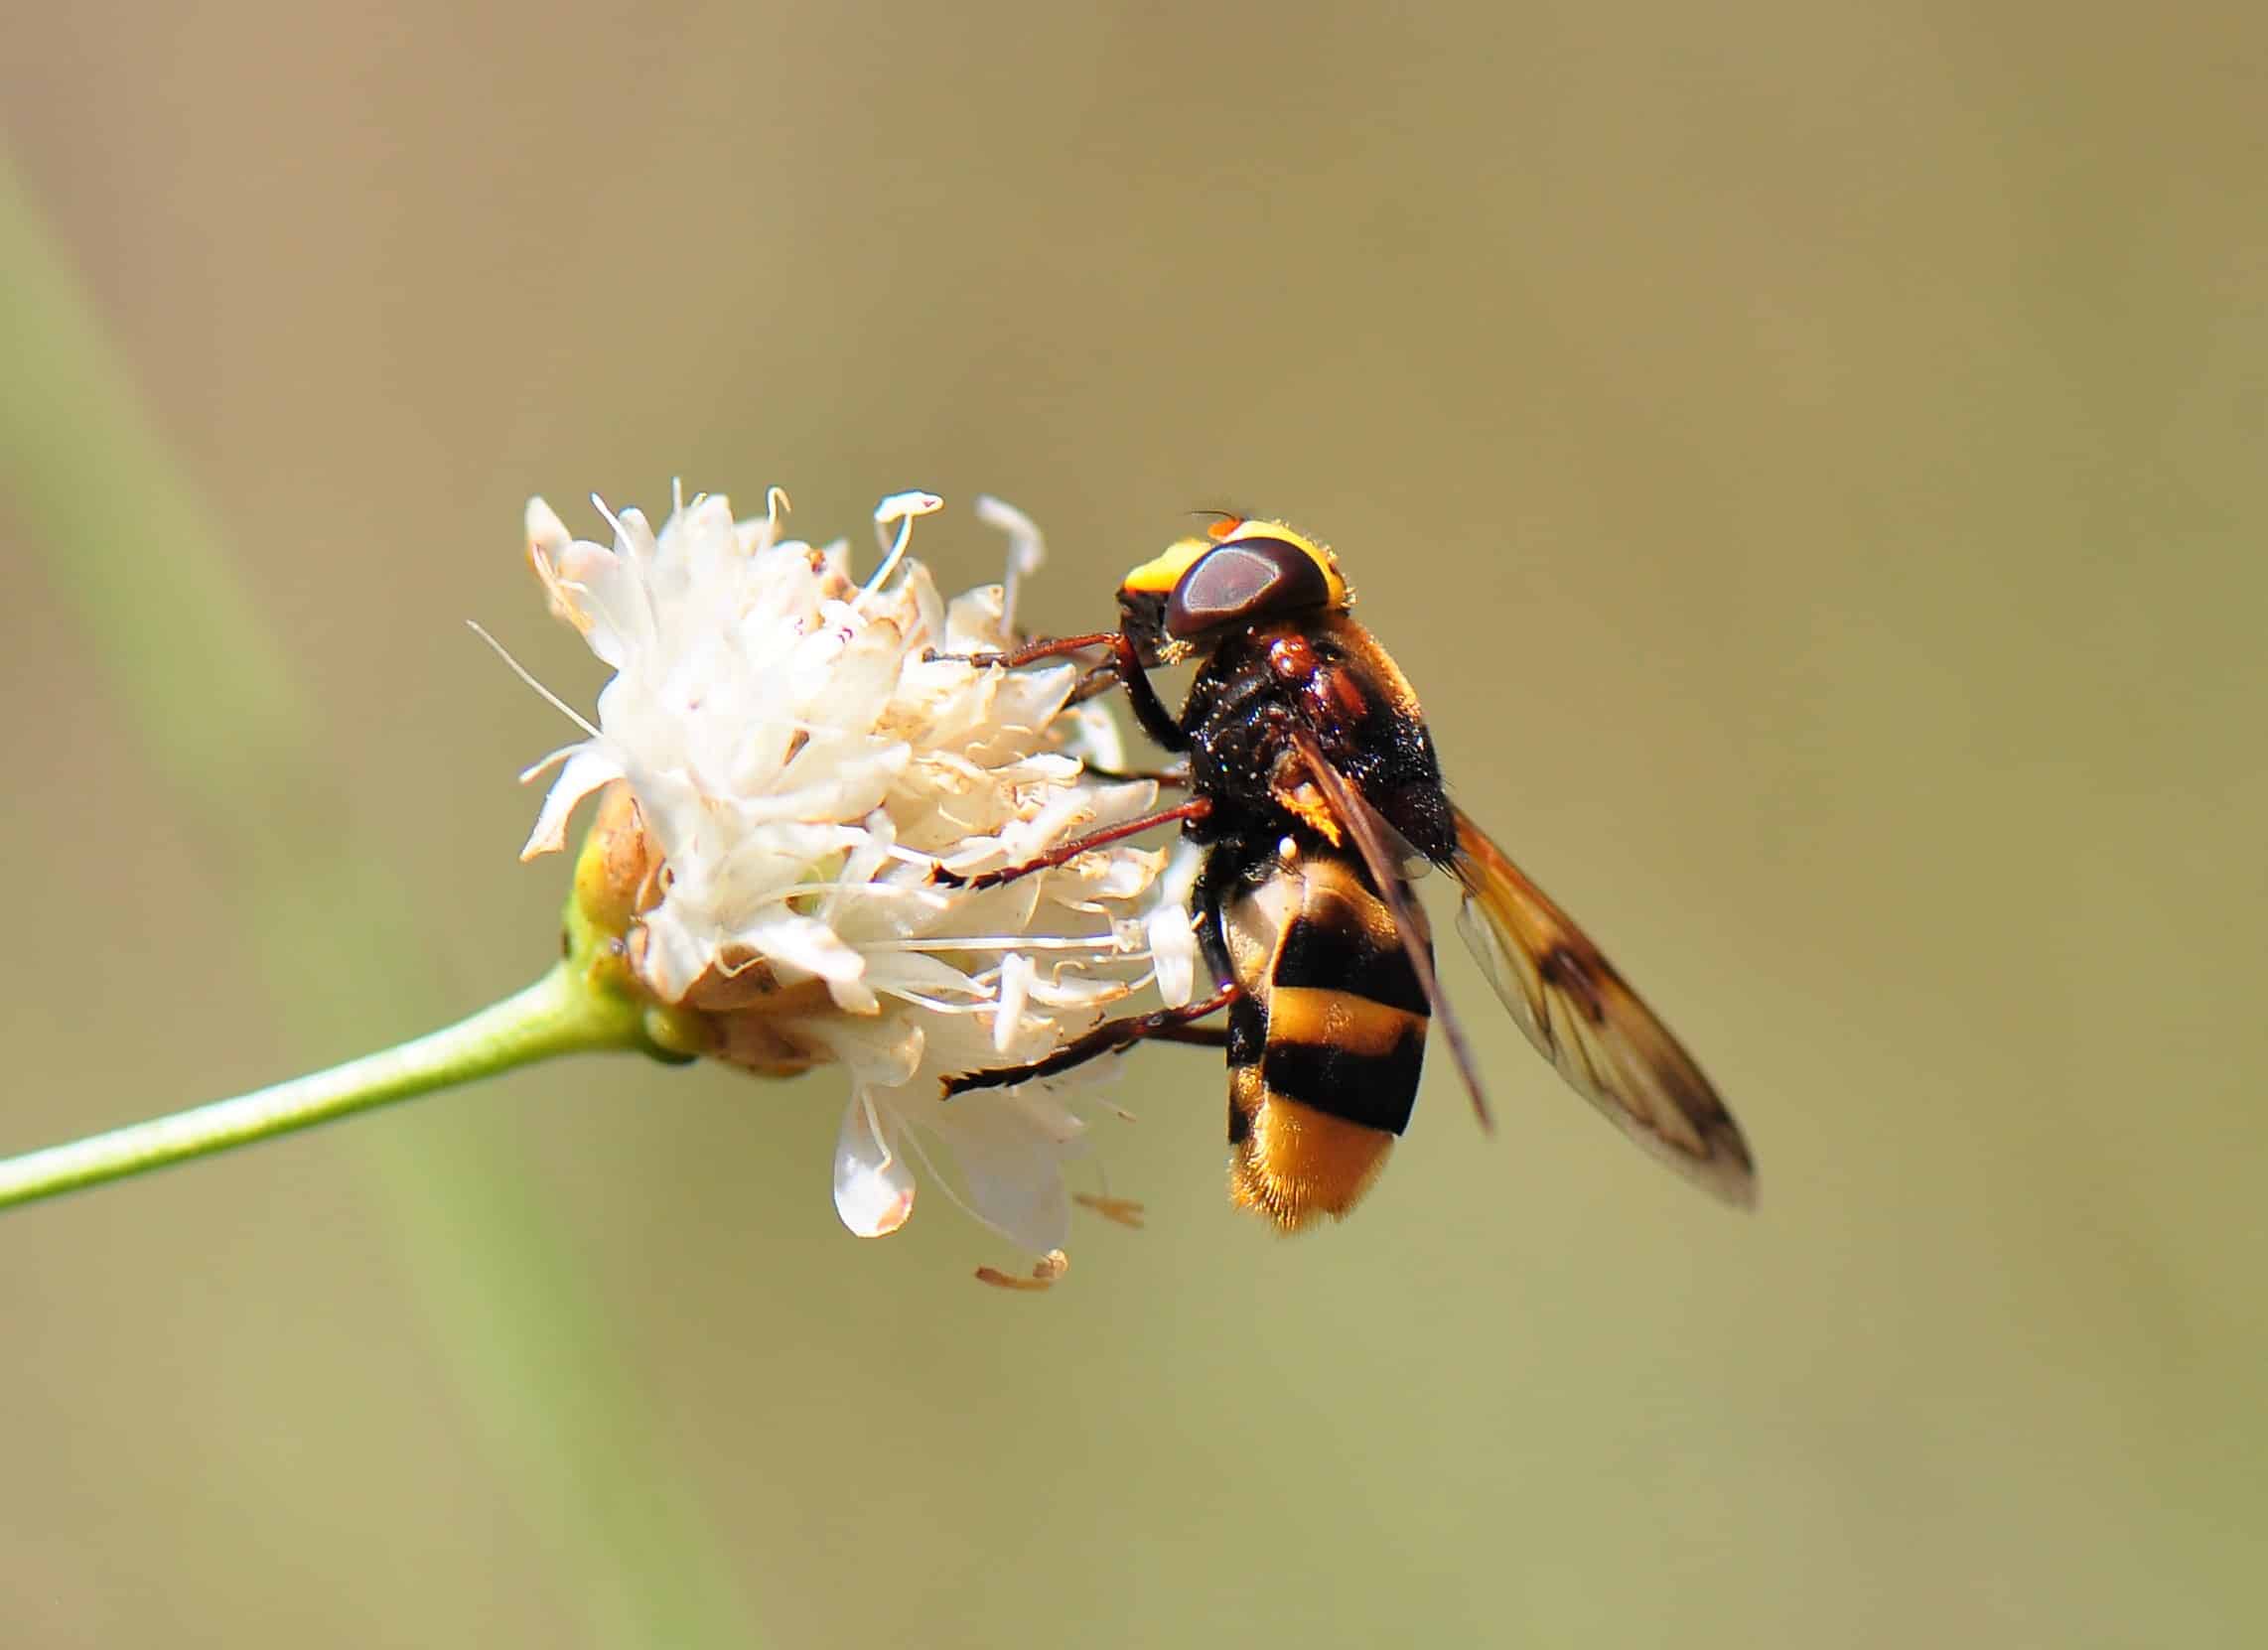 Transporting the pollen